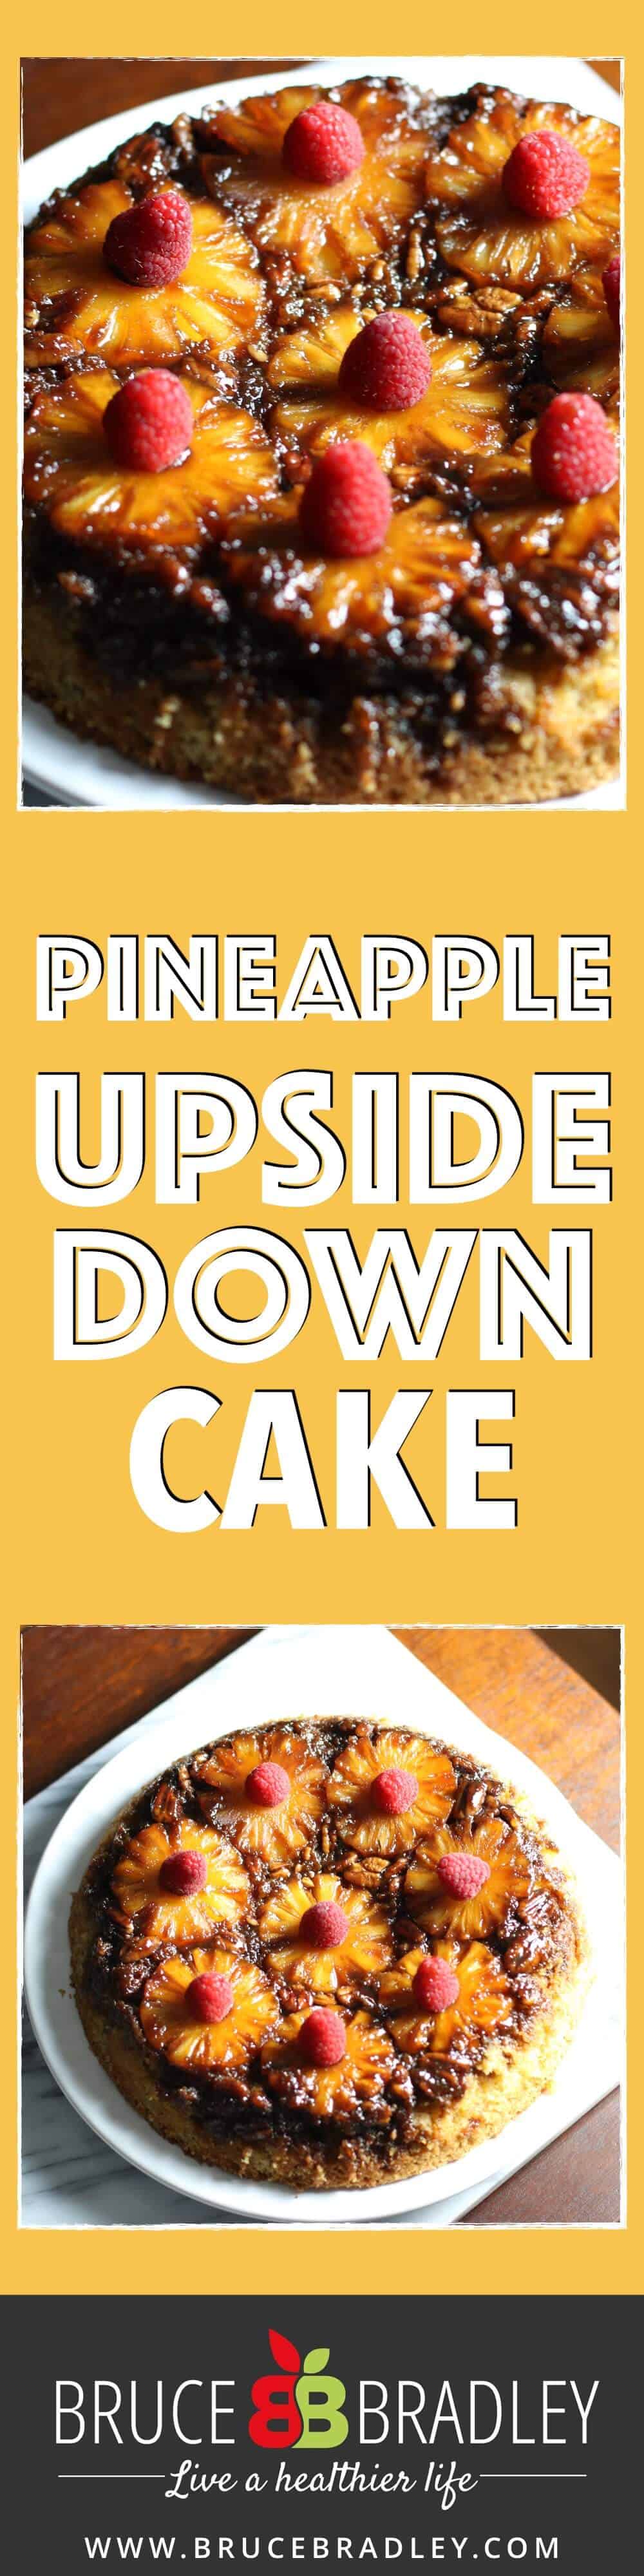 A Delicious, Unprocessed Version Of The Classic Pineapple Upside-Down Cake Recipe. It'S Perfect For Any Celebration, And It'S Super Easy Since There'S No Decoration Required!